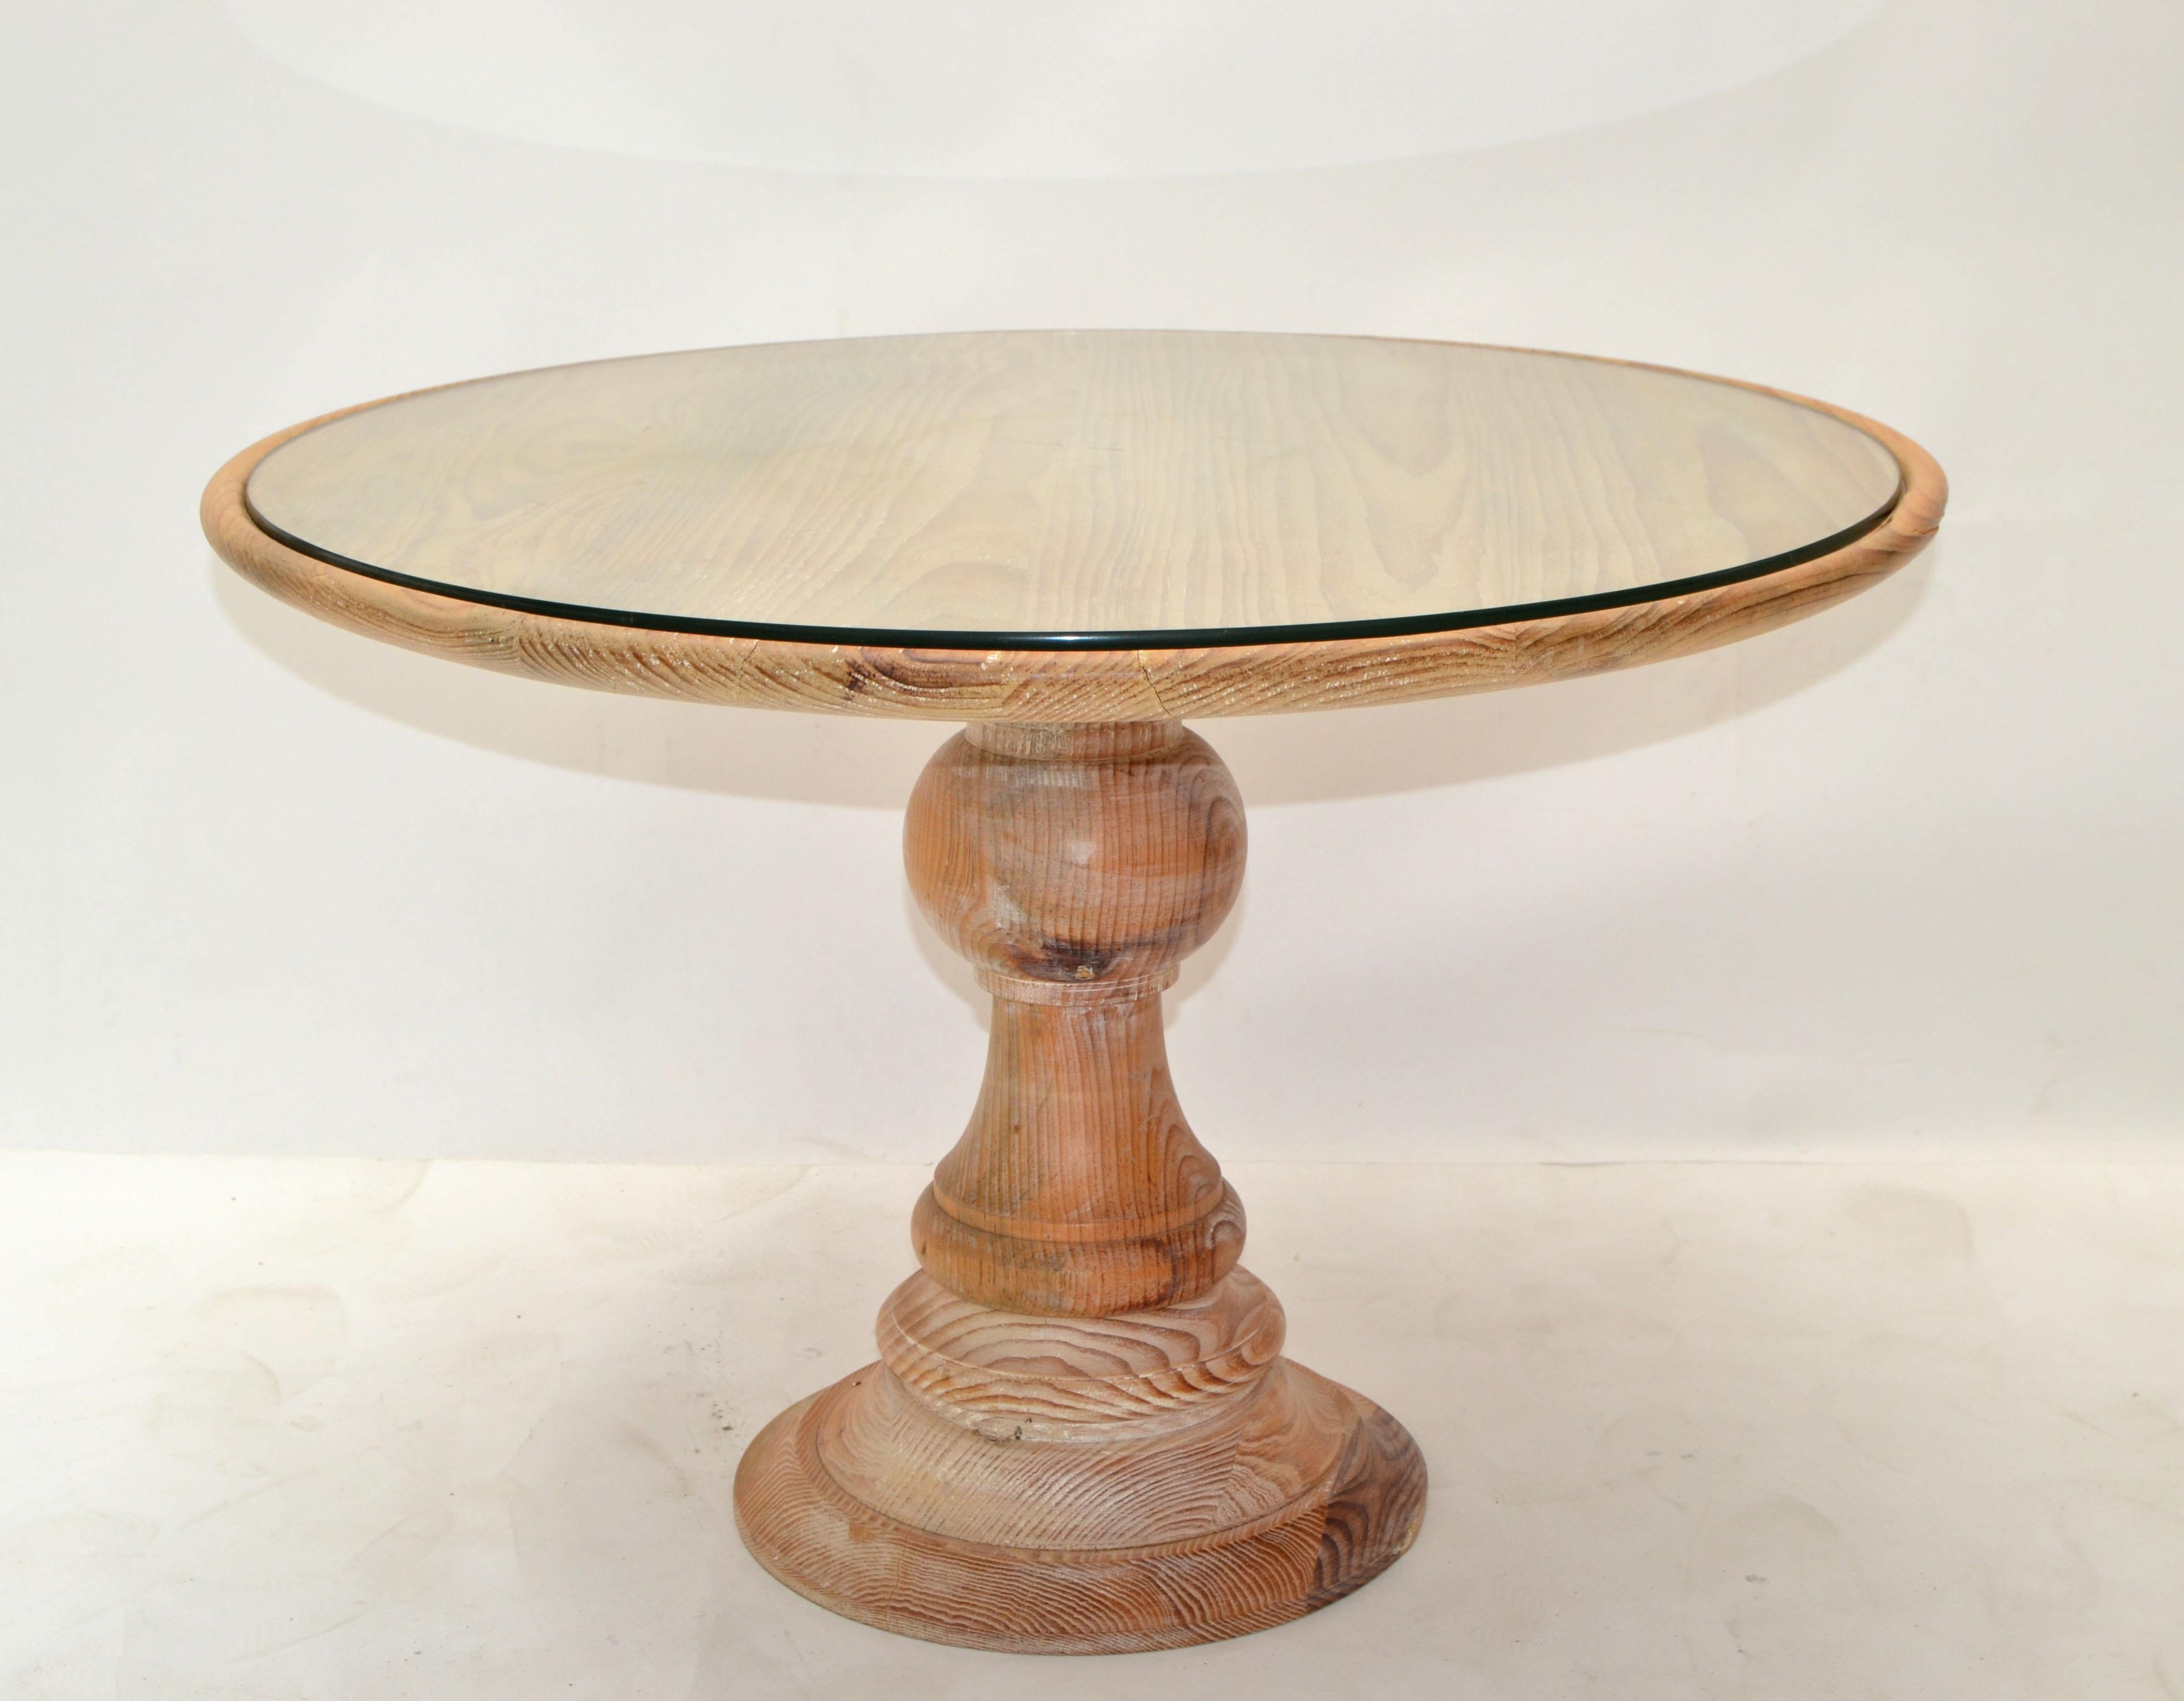 20th Century American Round Mid-Century Modern Turned Bleach Oak Wood & Glass Coffee Table For Sale